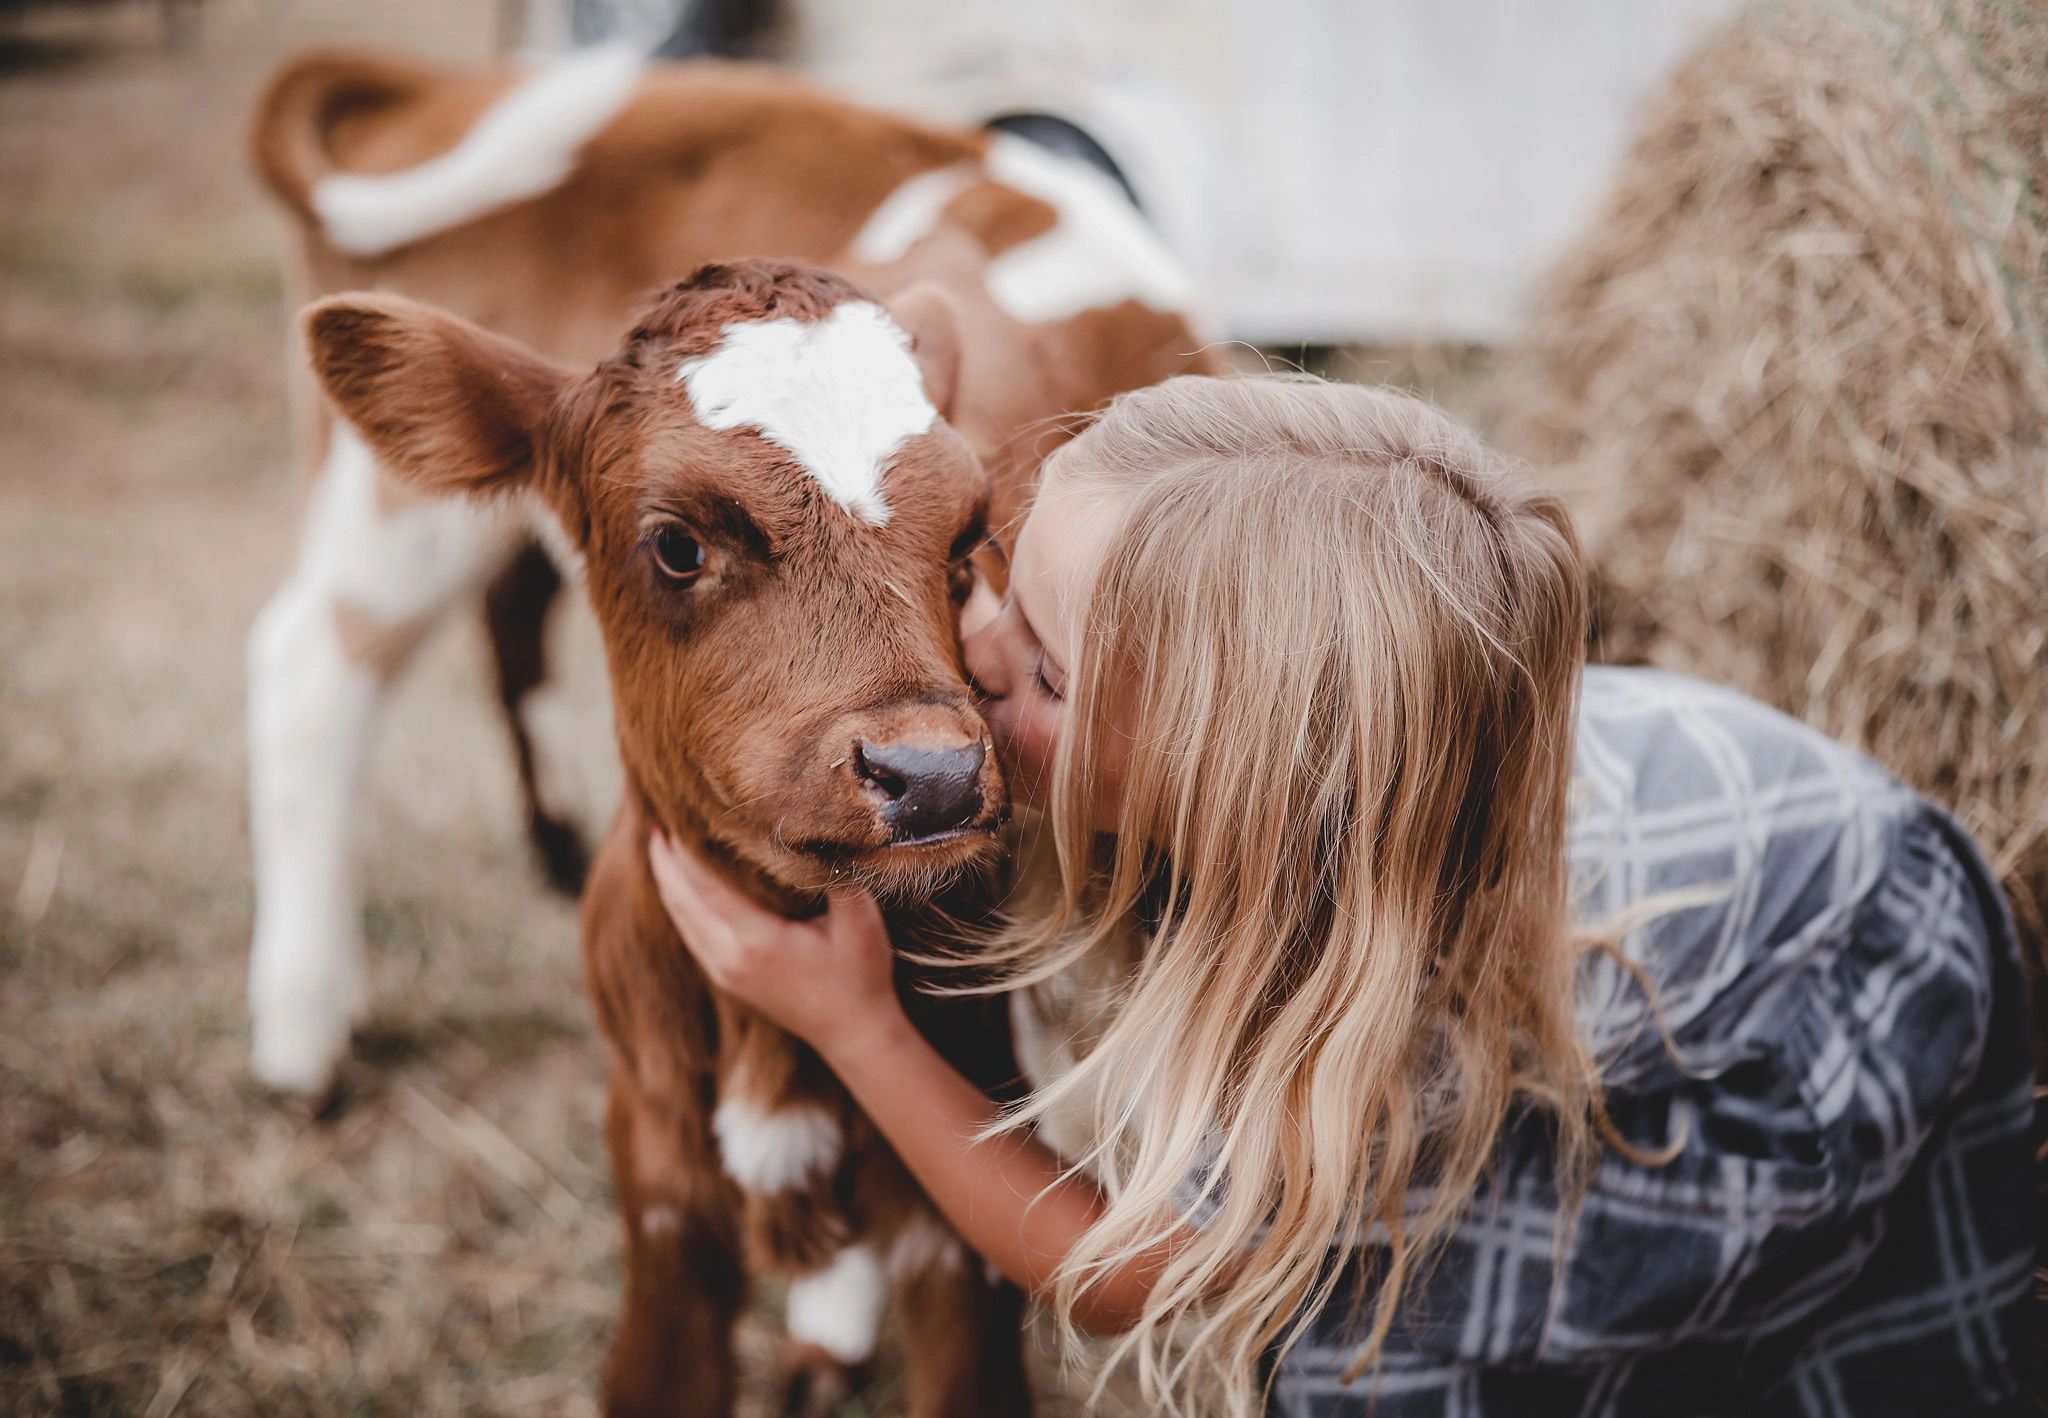 The Ultimate Guide to Miniature Cows: How to Raise and Profit from Mini Cows